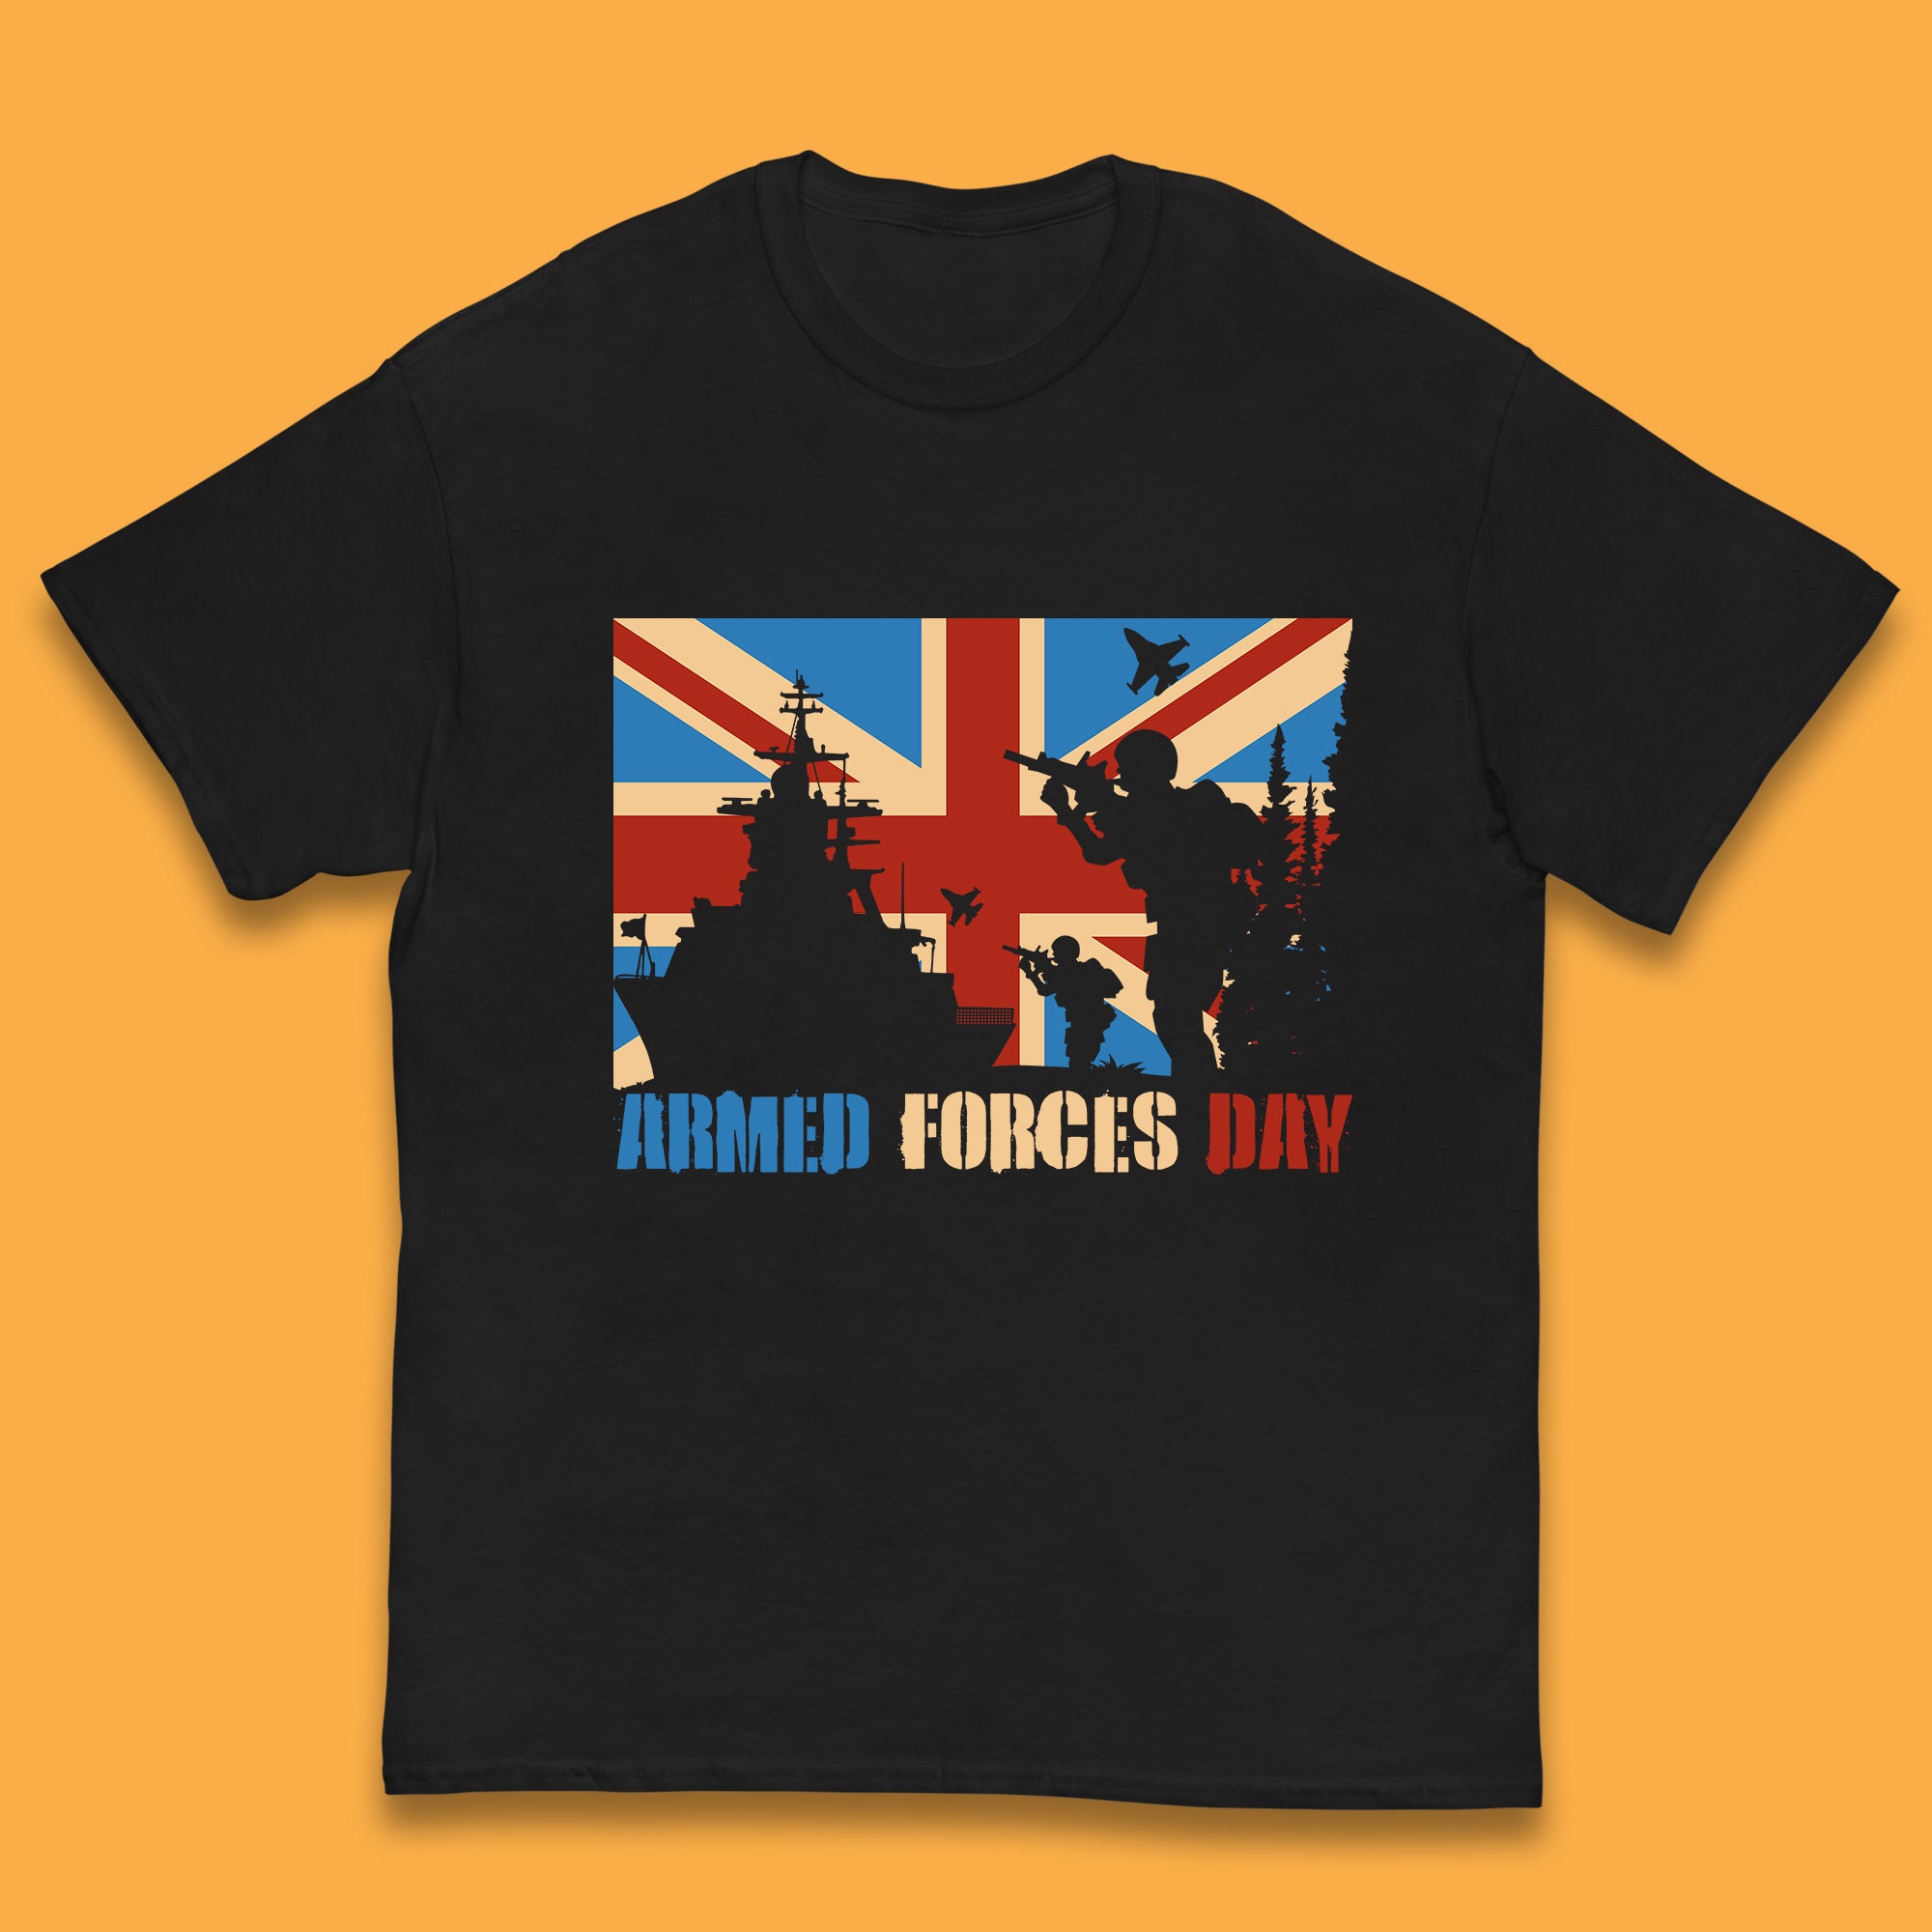 UK Flag British Armed Forces Day WWI Remembrance Day British Veterans Day Kids T Shirt